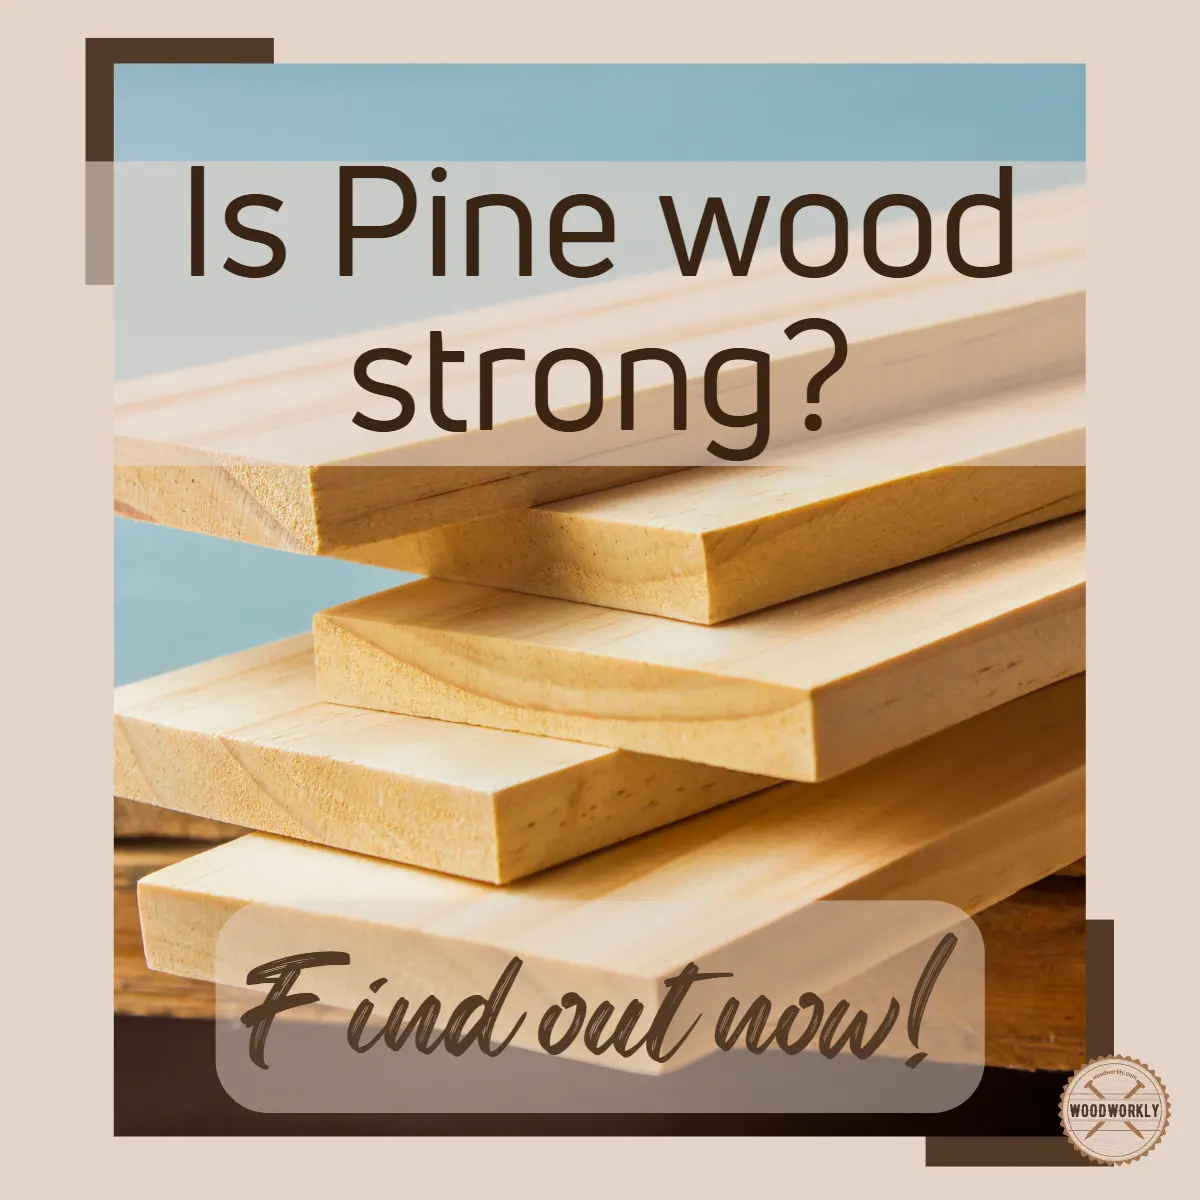 Is pine wood strong